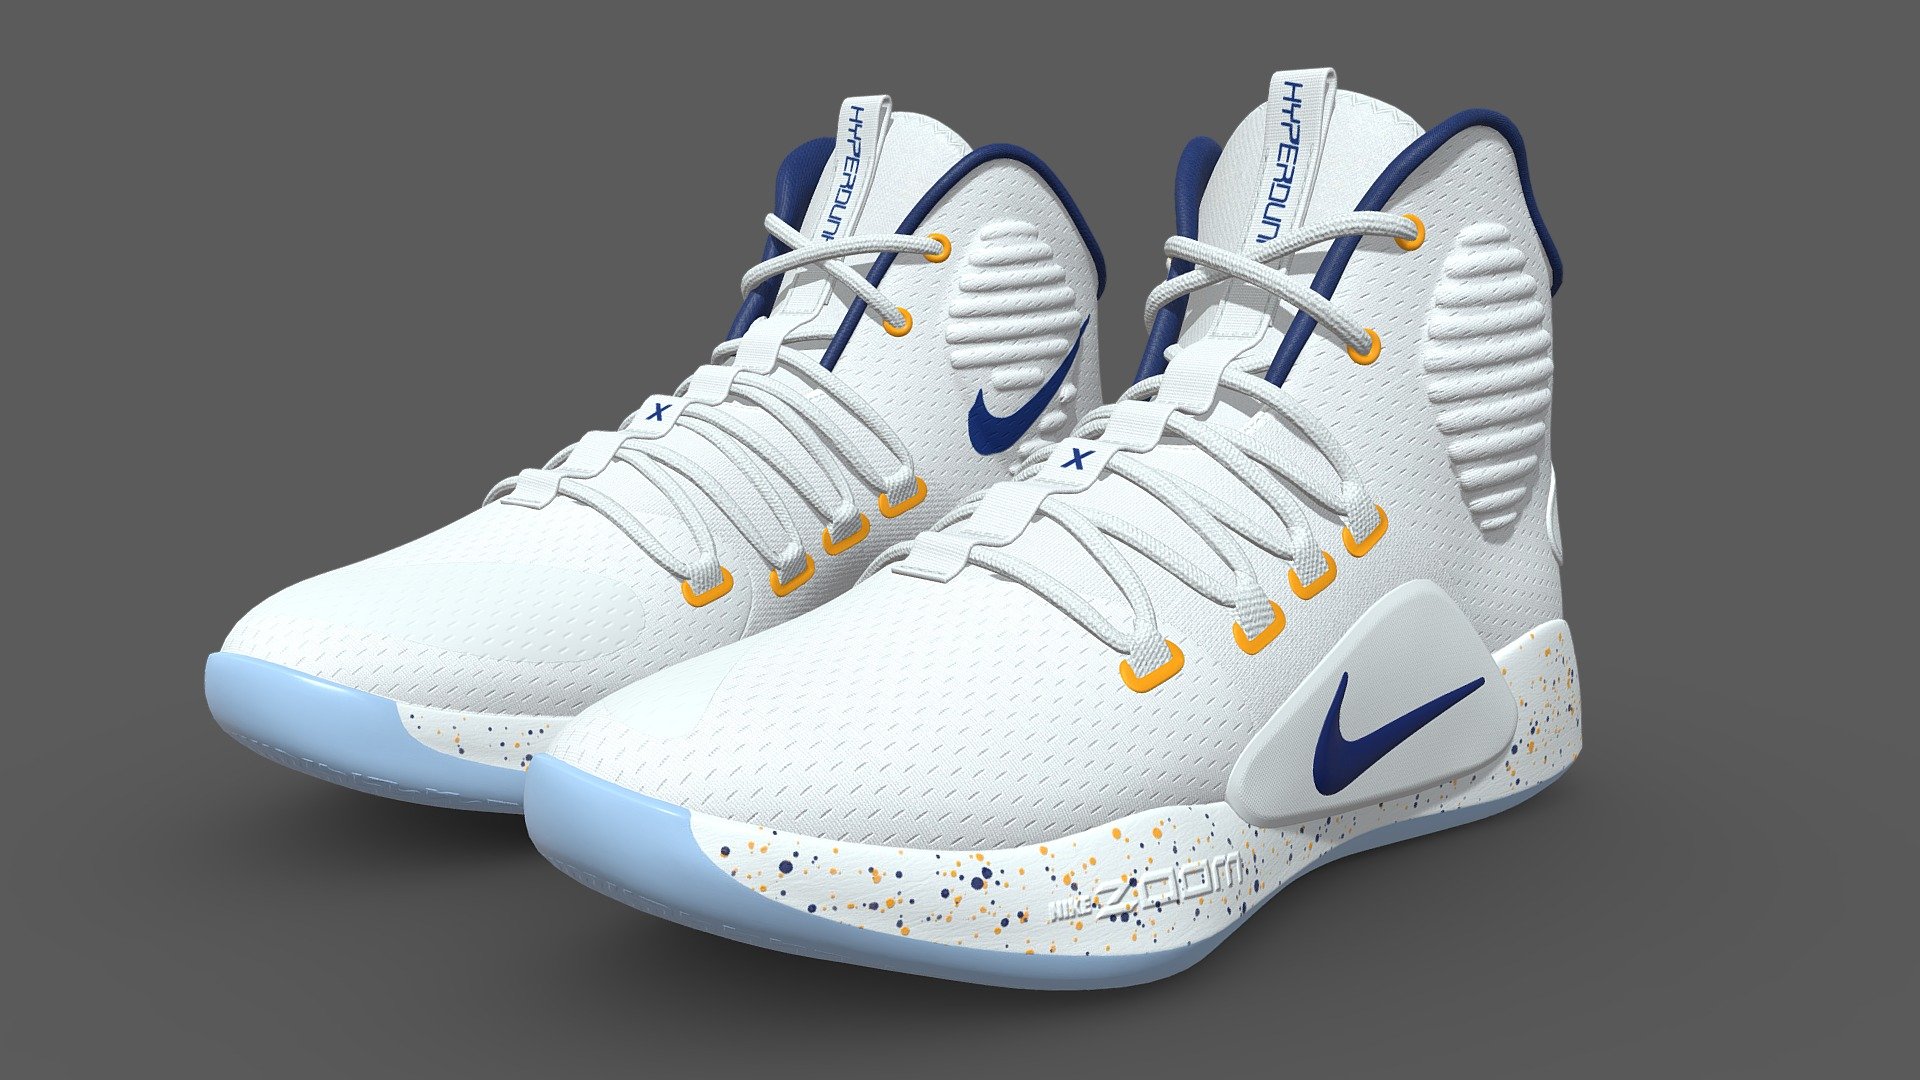 Nike Basketball Shoes Hyperdunk X EP

This model is suitable for use in broadcast, film , advertising, visualization, games. etc
The model is accurate with the real world size and scale

**[ TEXTURES ] **

Textures Formats: PNG 8192 x 8192
Textures Formats: PNG 4096 x 4096

Blender file included with 8K Textures Embedded within the file.
Both the shoes share the same textures except for the Roughness &amp; Normap Map which is named as Right for the right shoe. 
UVs are non-overlapping and unwrapped in a very clean manner 3d model